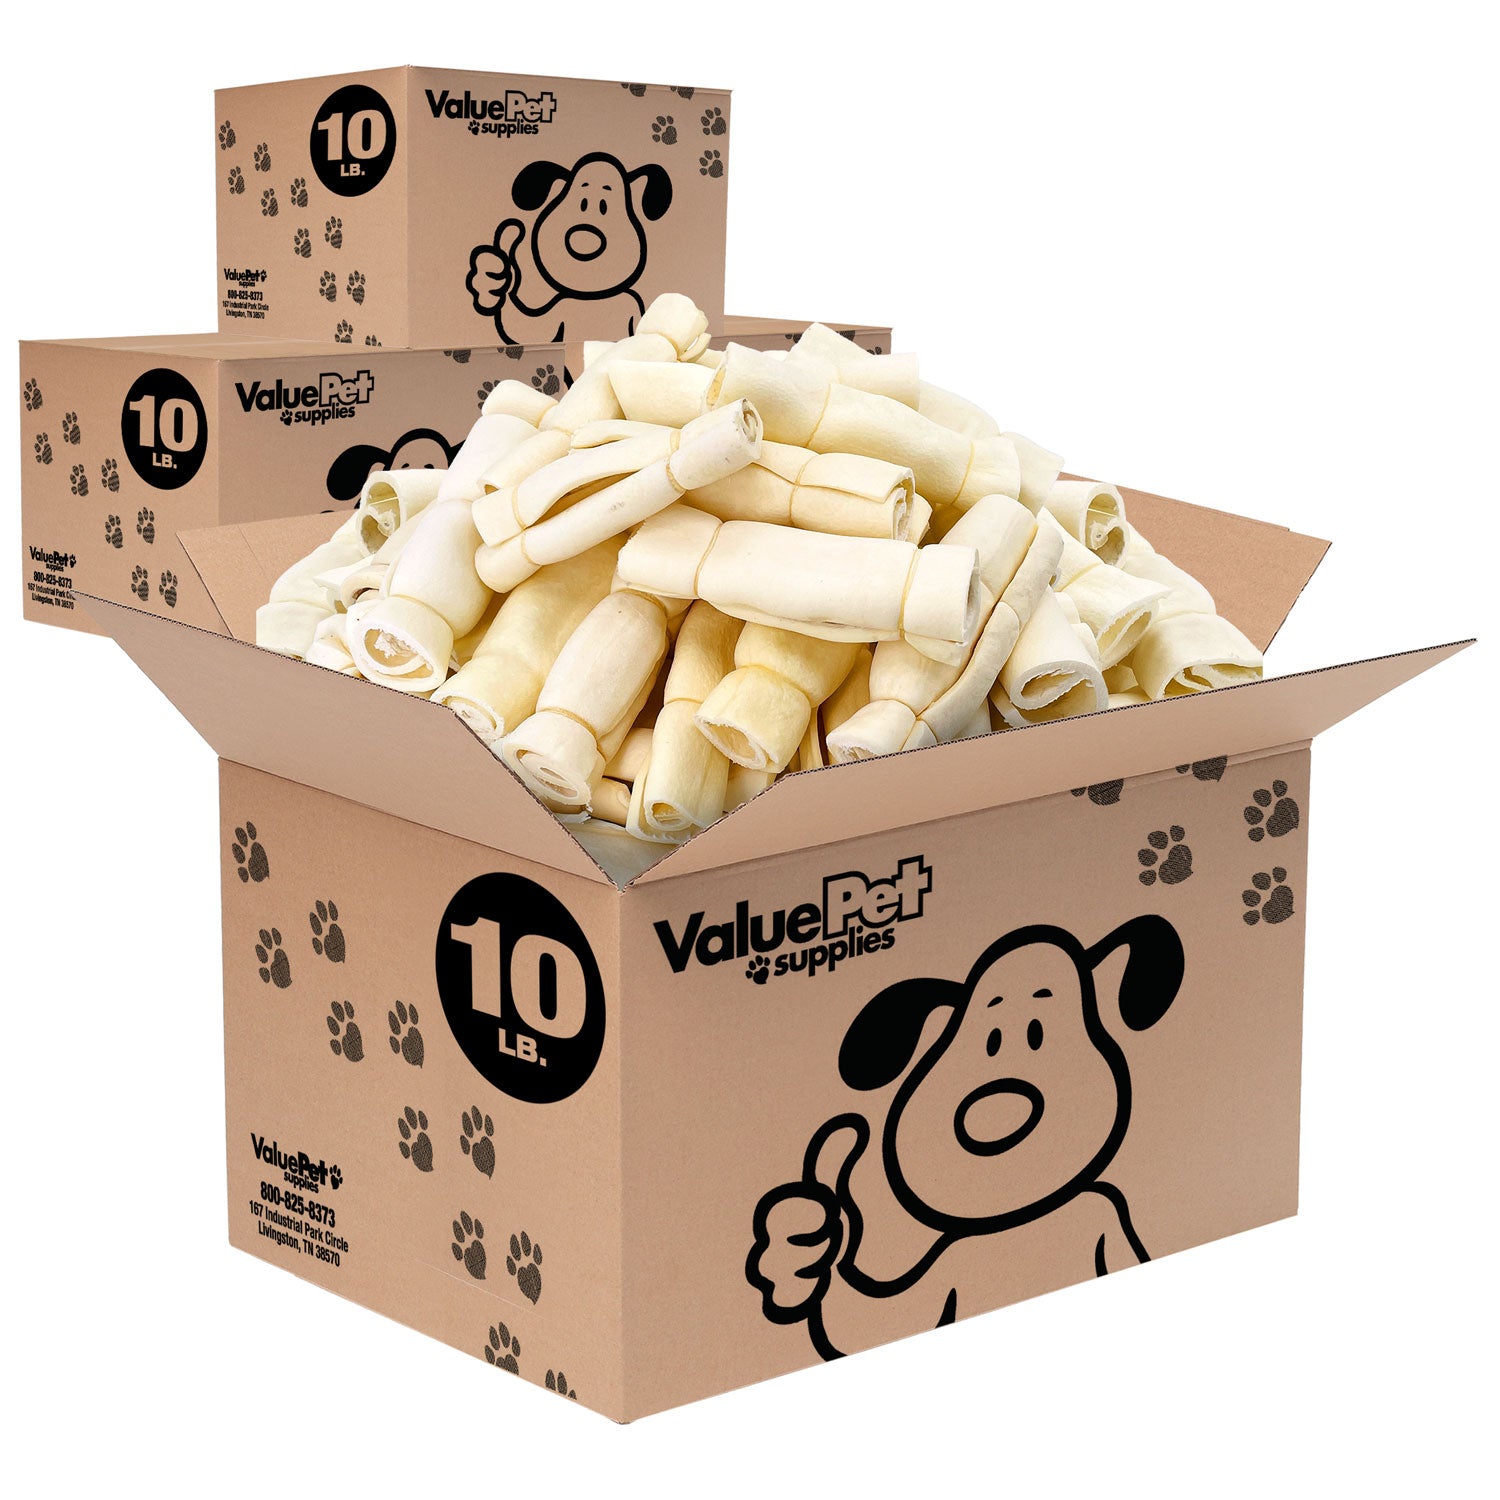 ValueBull Cheek Rolls, Premium Beef Dog Chews, Varied Shapes, 6 Inch, 40 Pounds WHOLESALE PACK